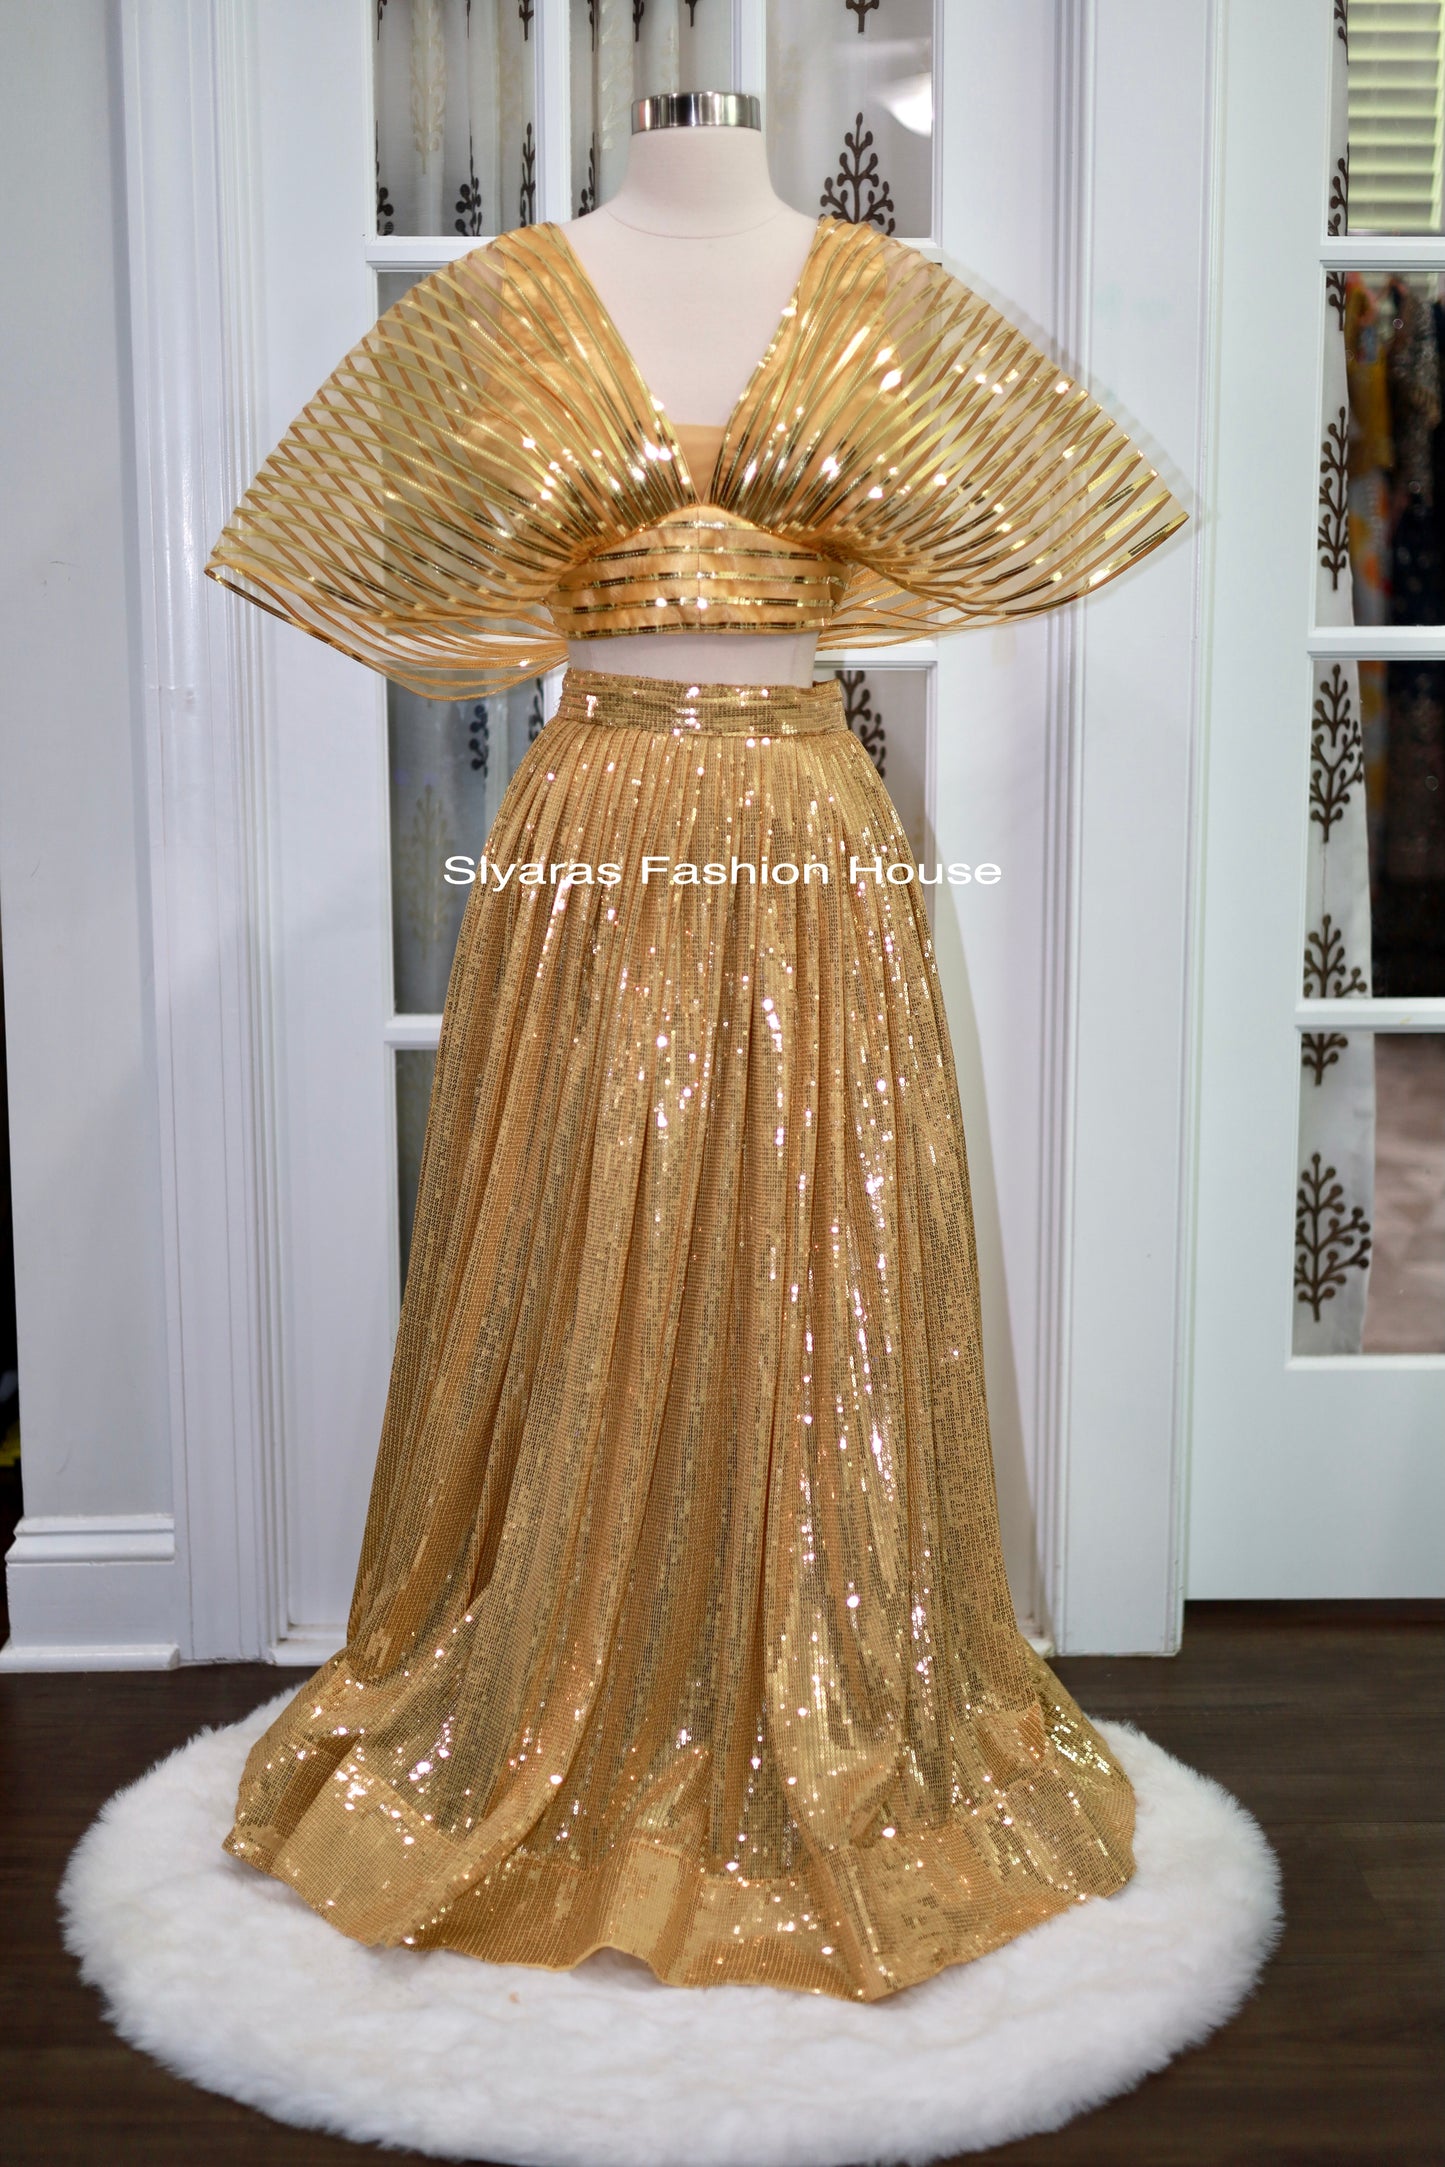 Super chic and trendy Metallic Ballon type Blouse with matching Gold Sequin Skirt